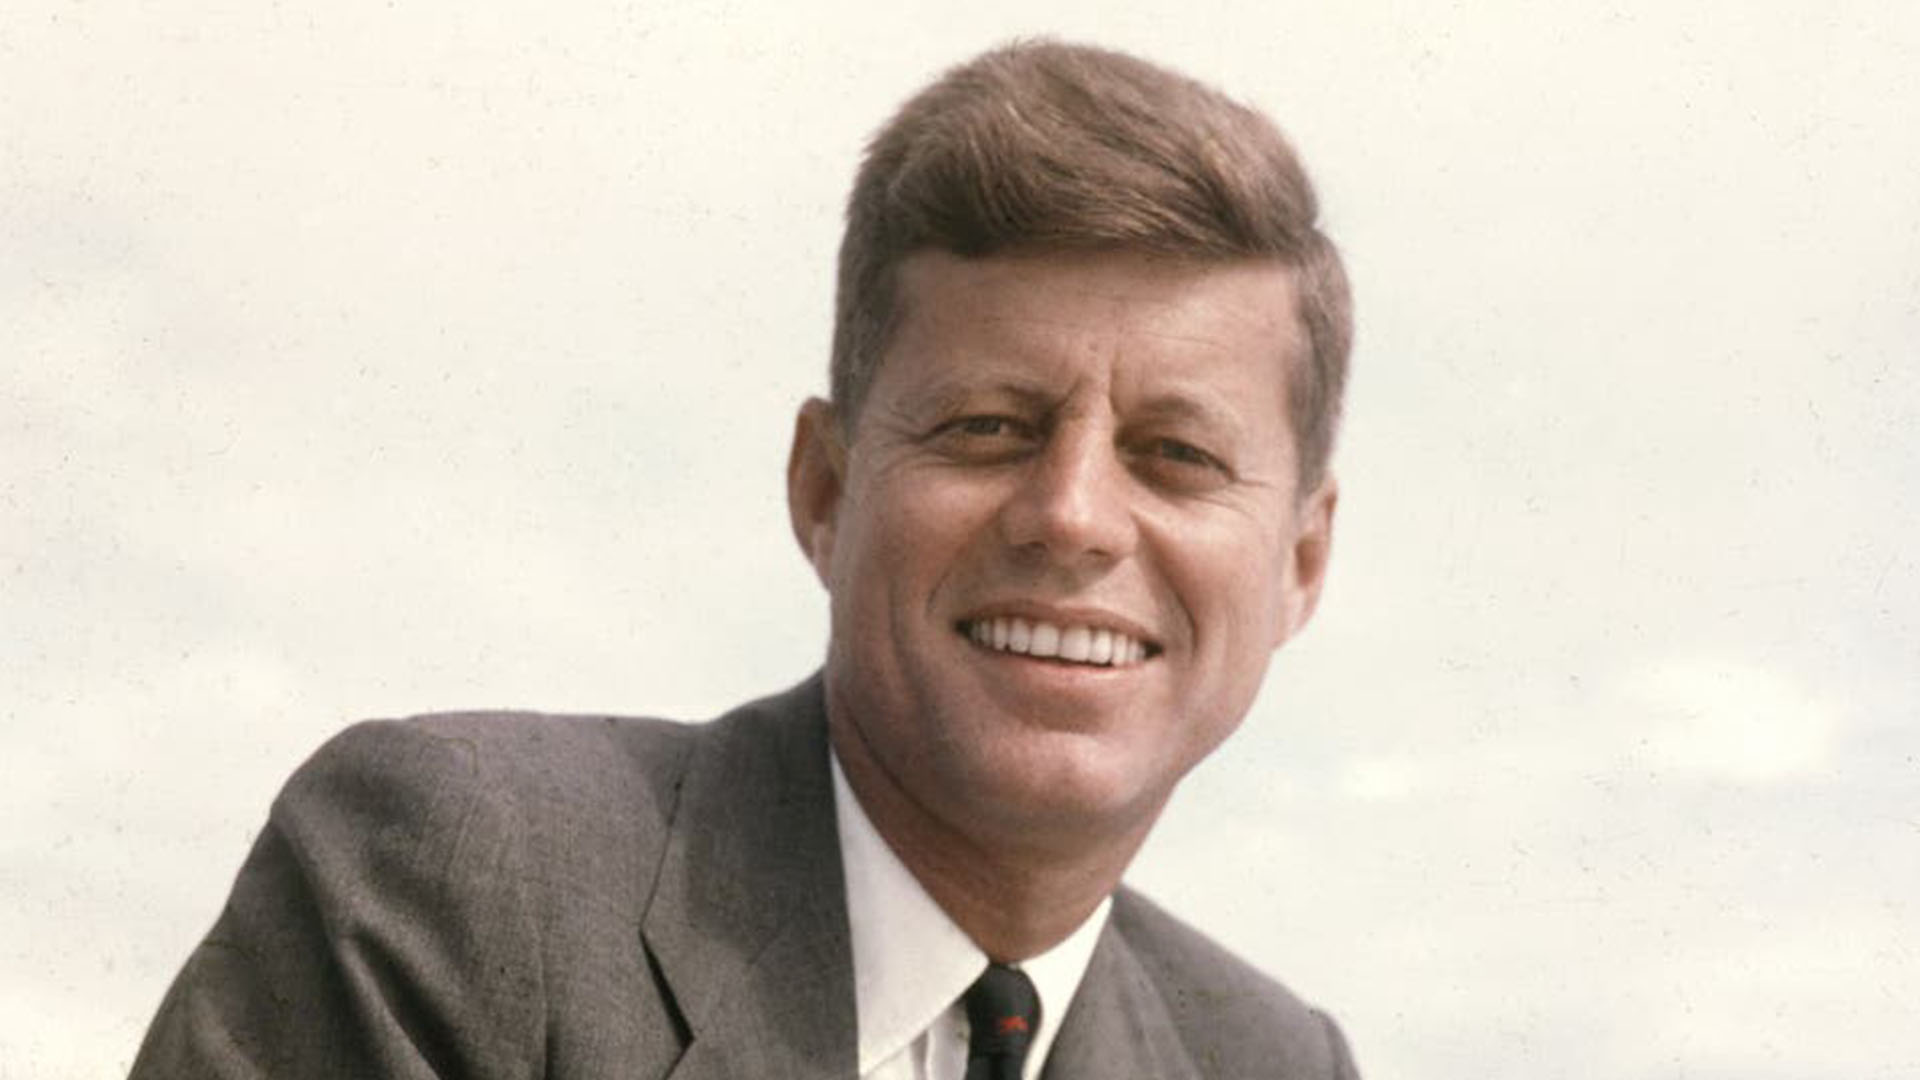 10 Things You May Not Know About John F. Kennedy